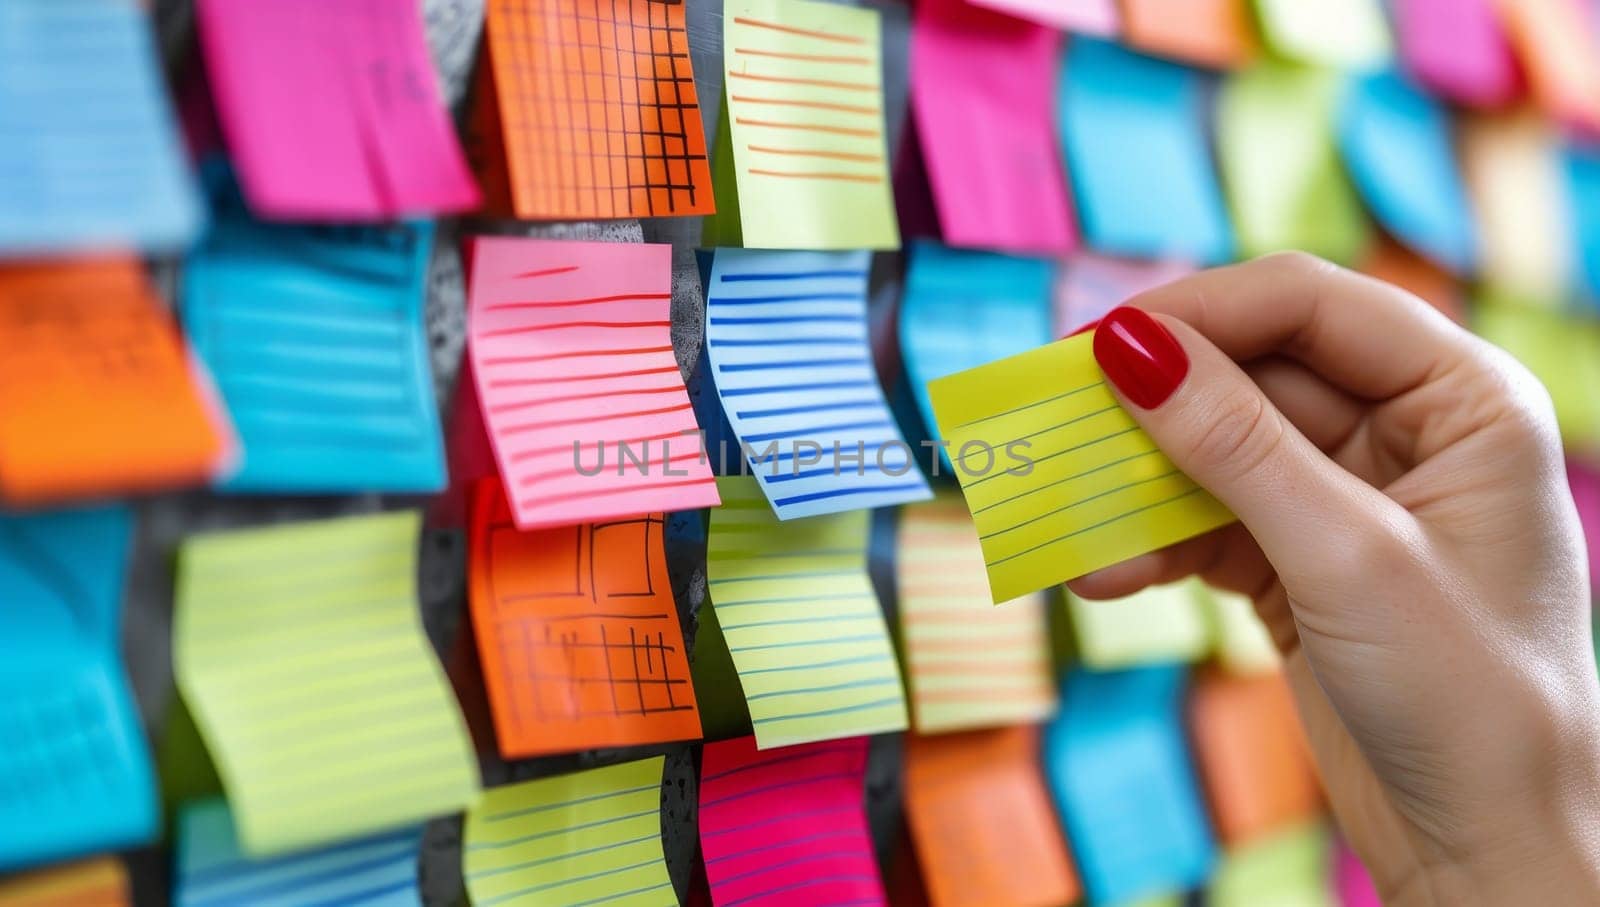 Closeup image of female hand holding colorful sticky notes on a wall